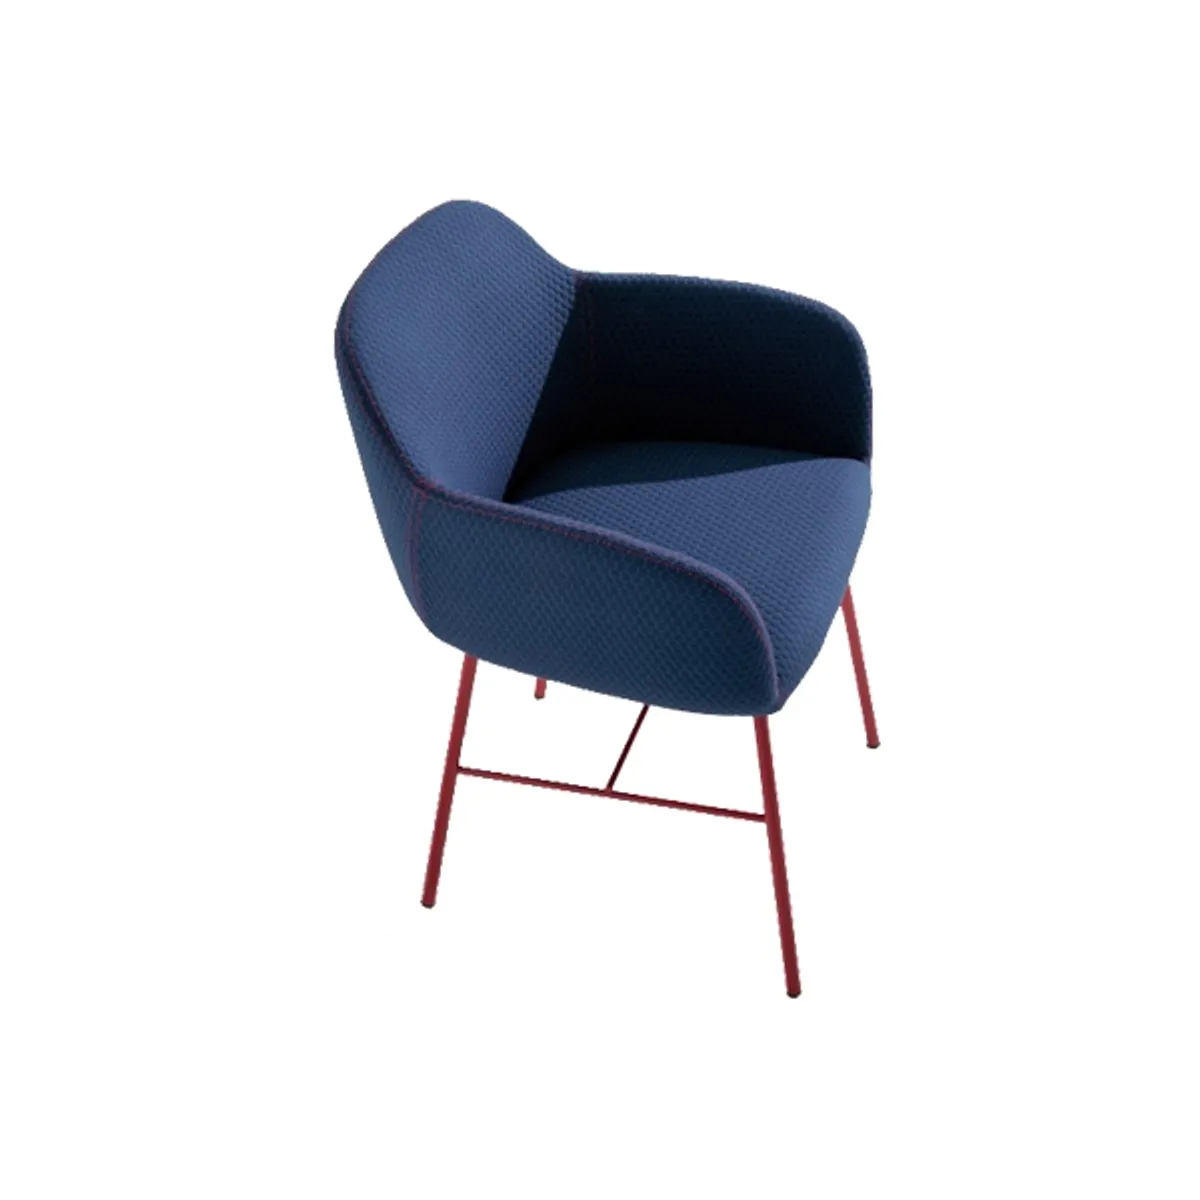 Myrametalarmchair Inside Out Contracts2